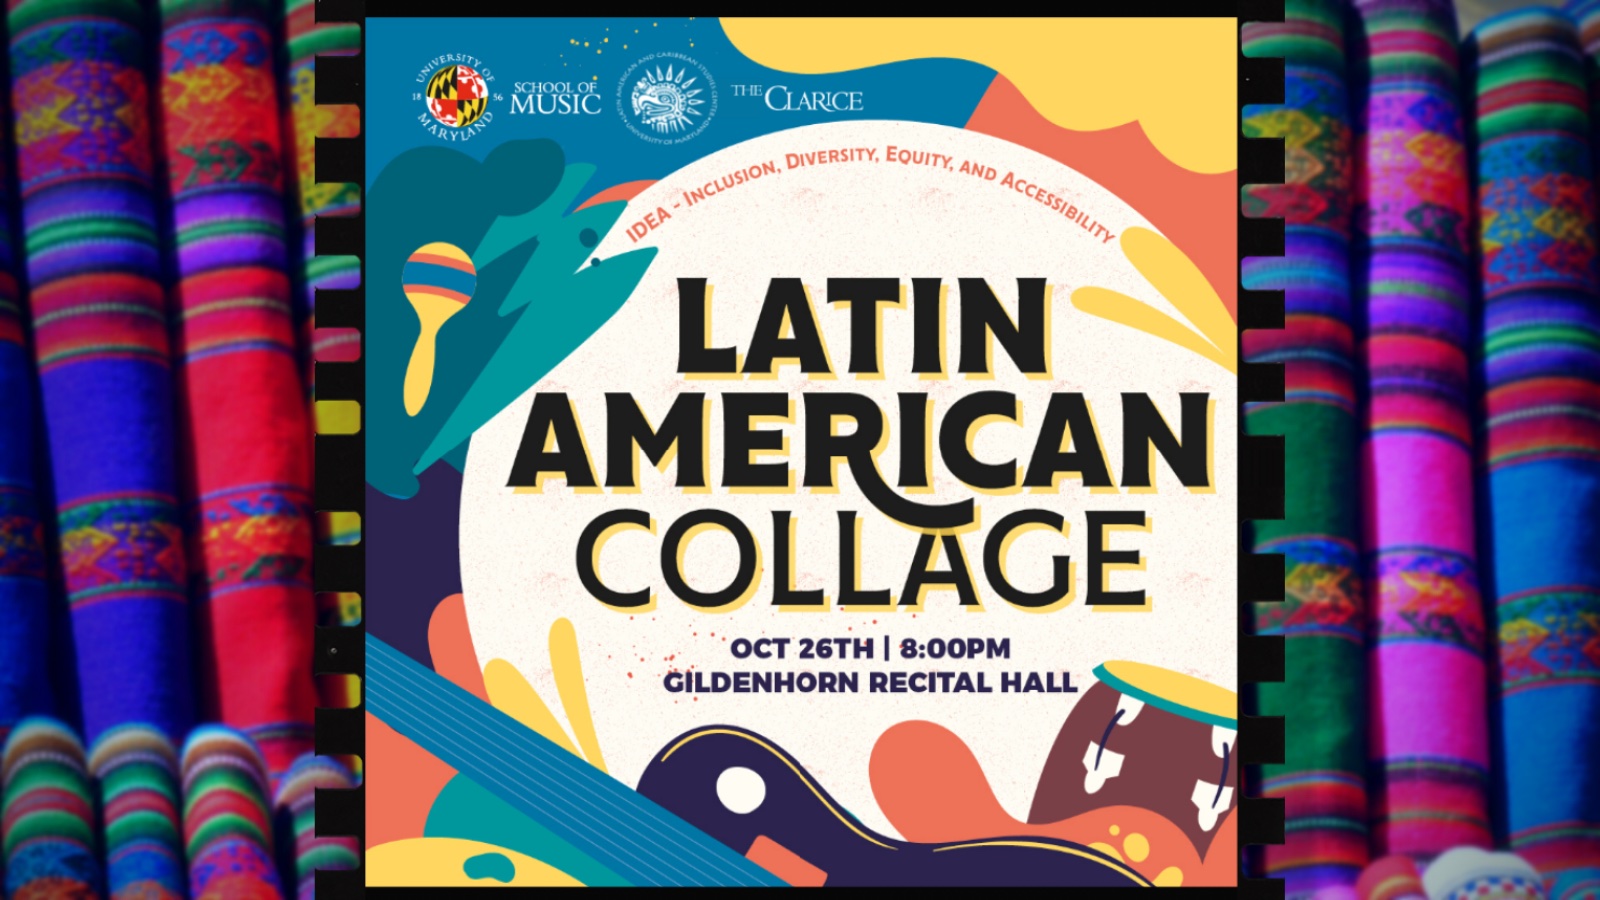 A colorful graphic with the Latin American Collage title.